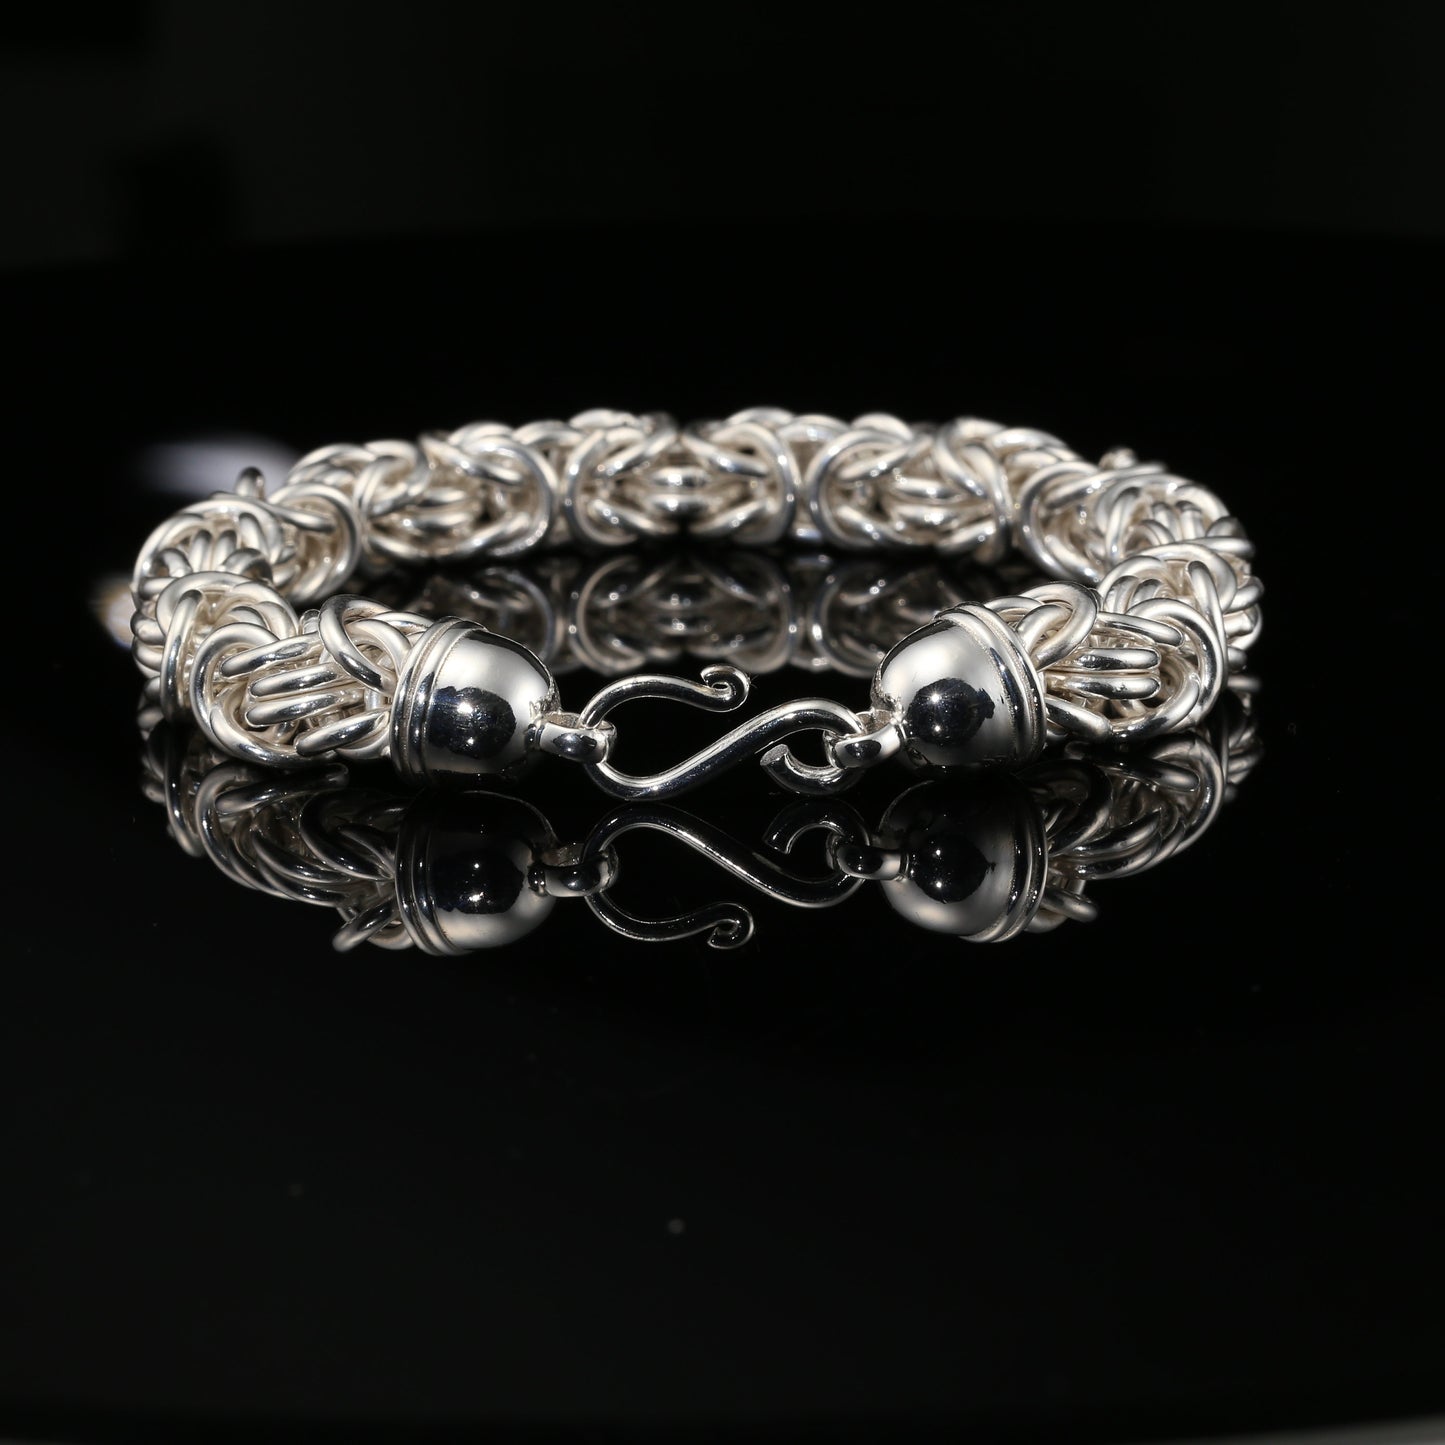 Byzantine Chain Bracelet with S-Hook Clasp in Sterling Silver, 8.75" Unisex